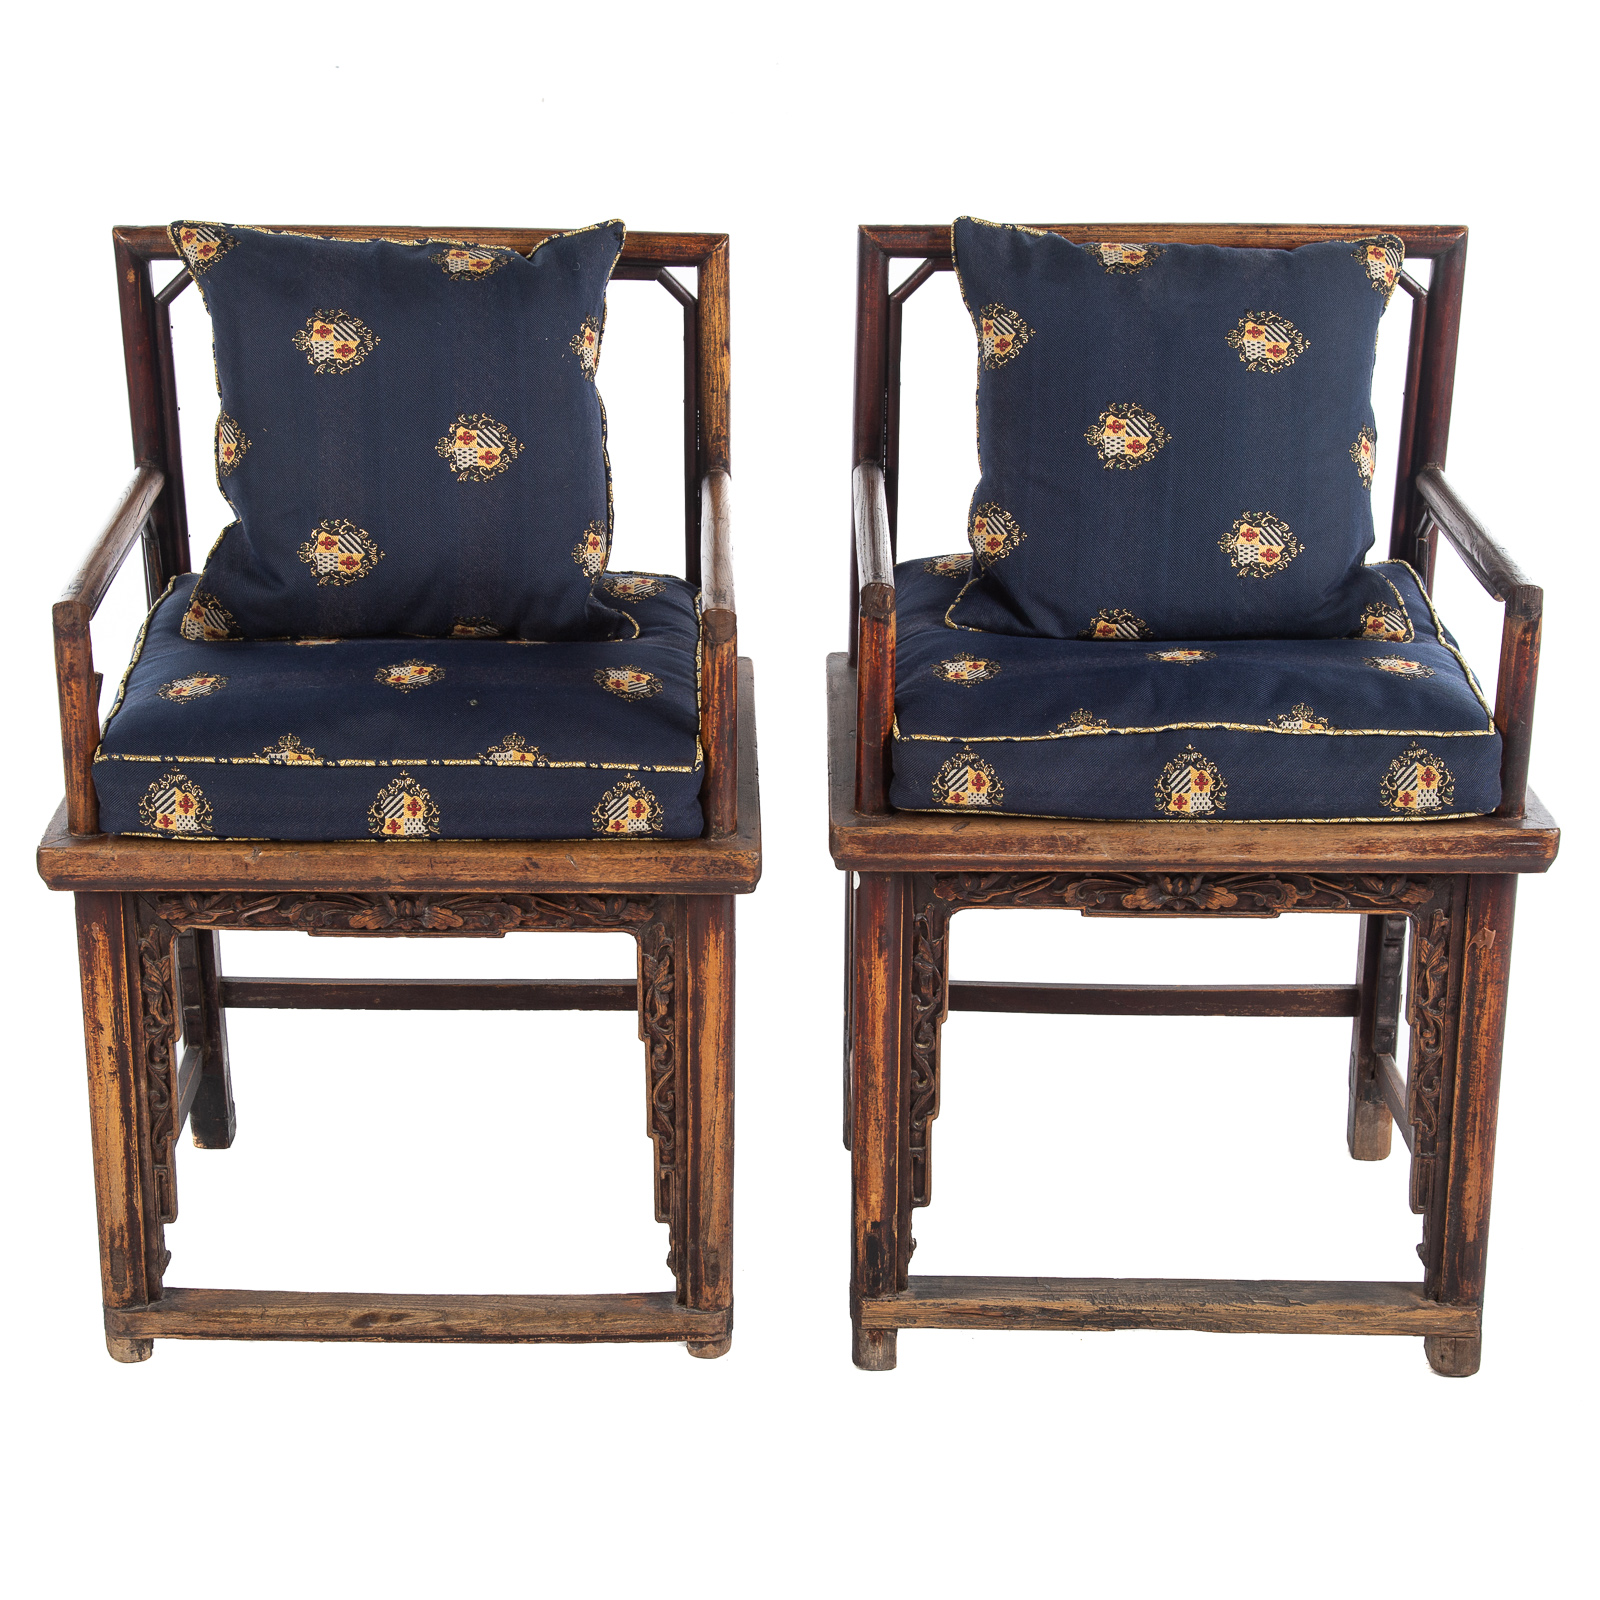 A PAIR OF CHINESE HARDWOOD ARMCHAIRS 36a4f8